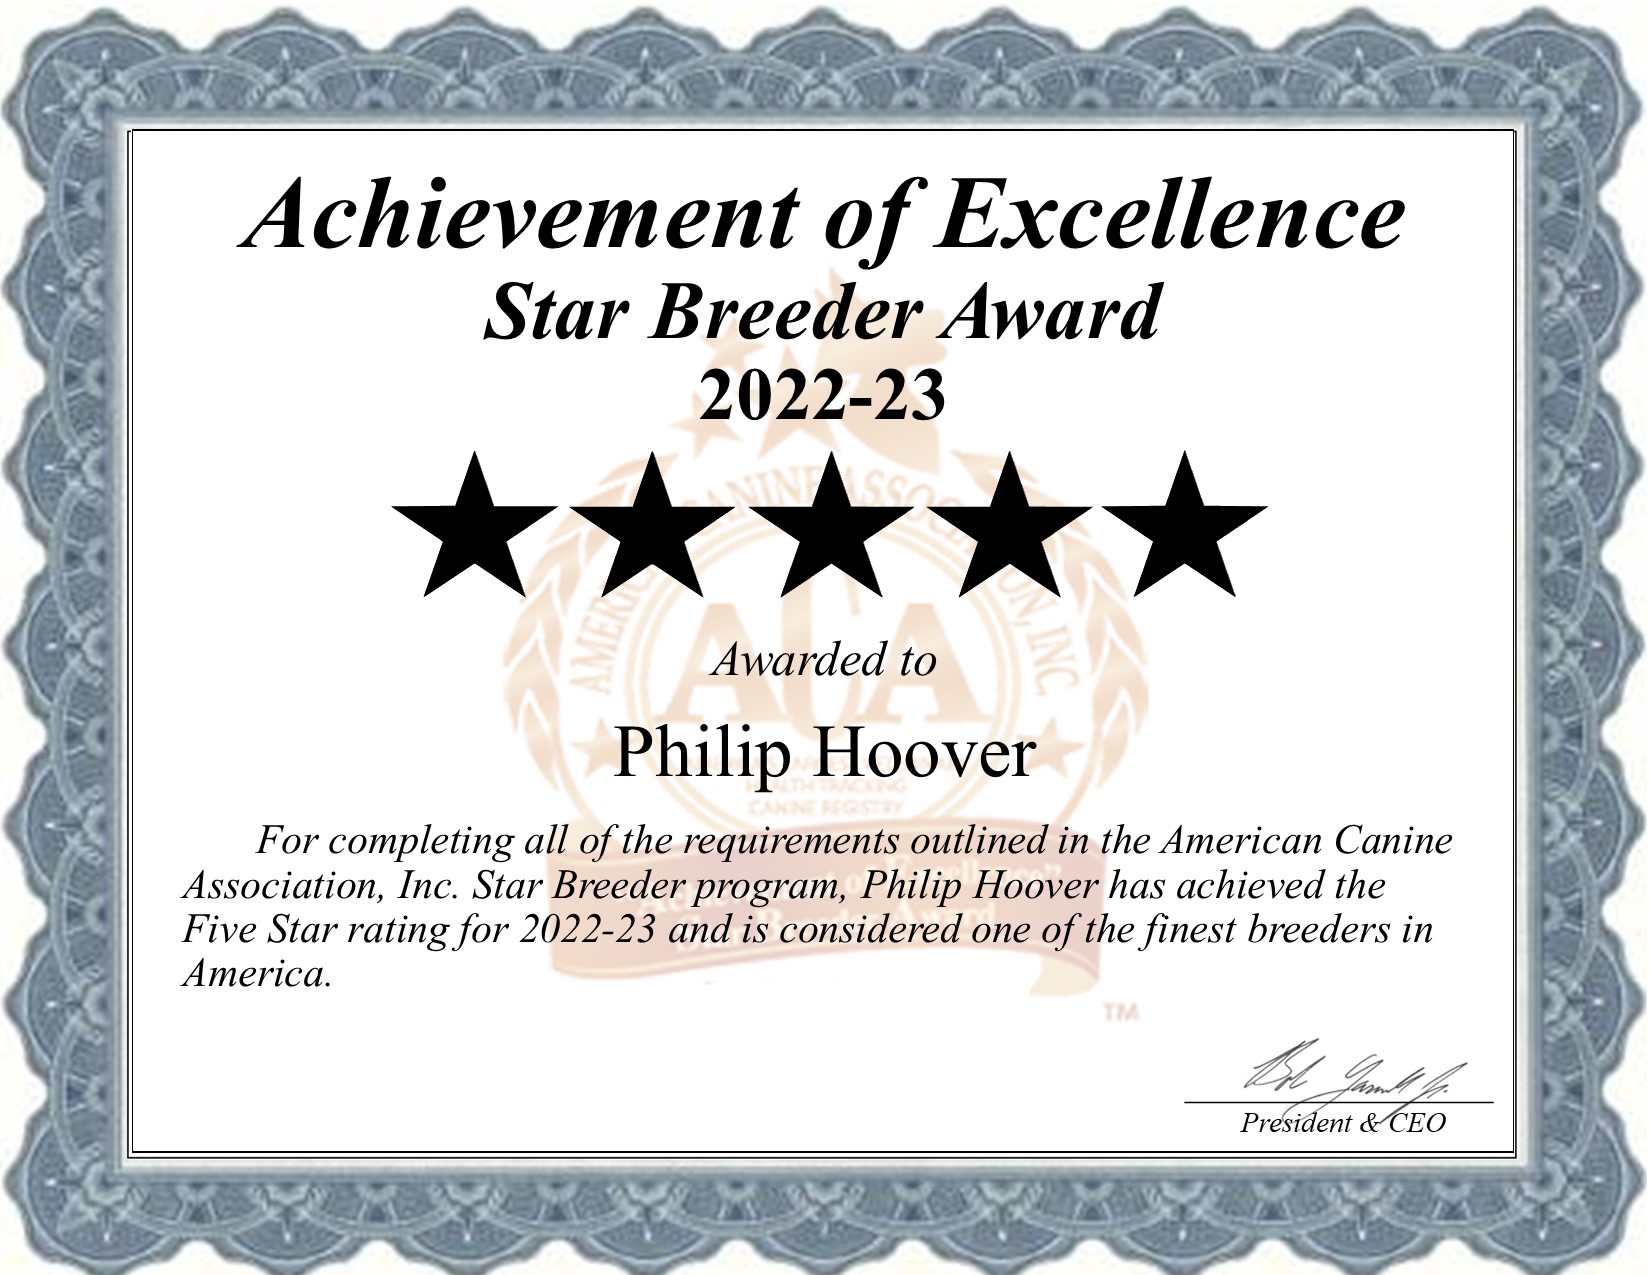 Philip, Hoover, dog, breeder, star, certificate, Philip-Hoover, Memphis, MO, Missouri, puppy, dog, kennels, mill, puppymill, usda, 5-star, aca, ica, registered, Yorkshire Terrier,  43-A-5673